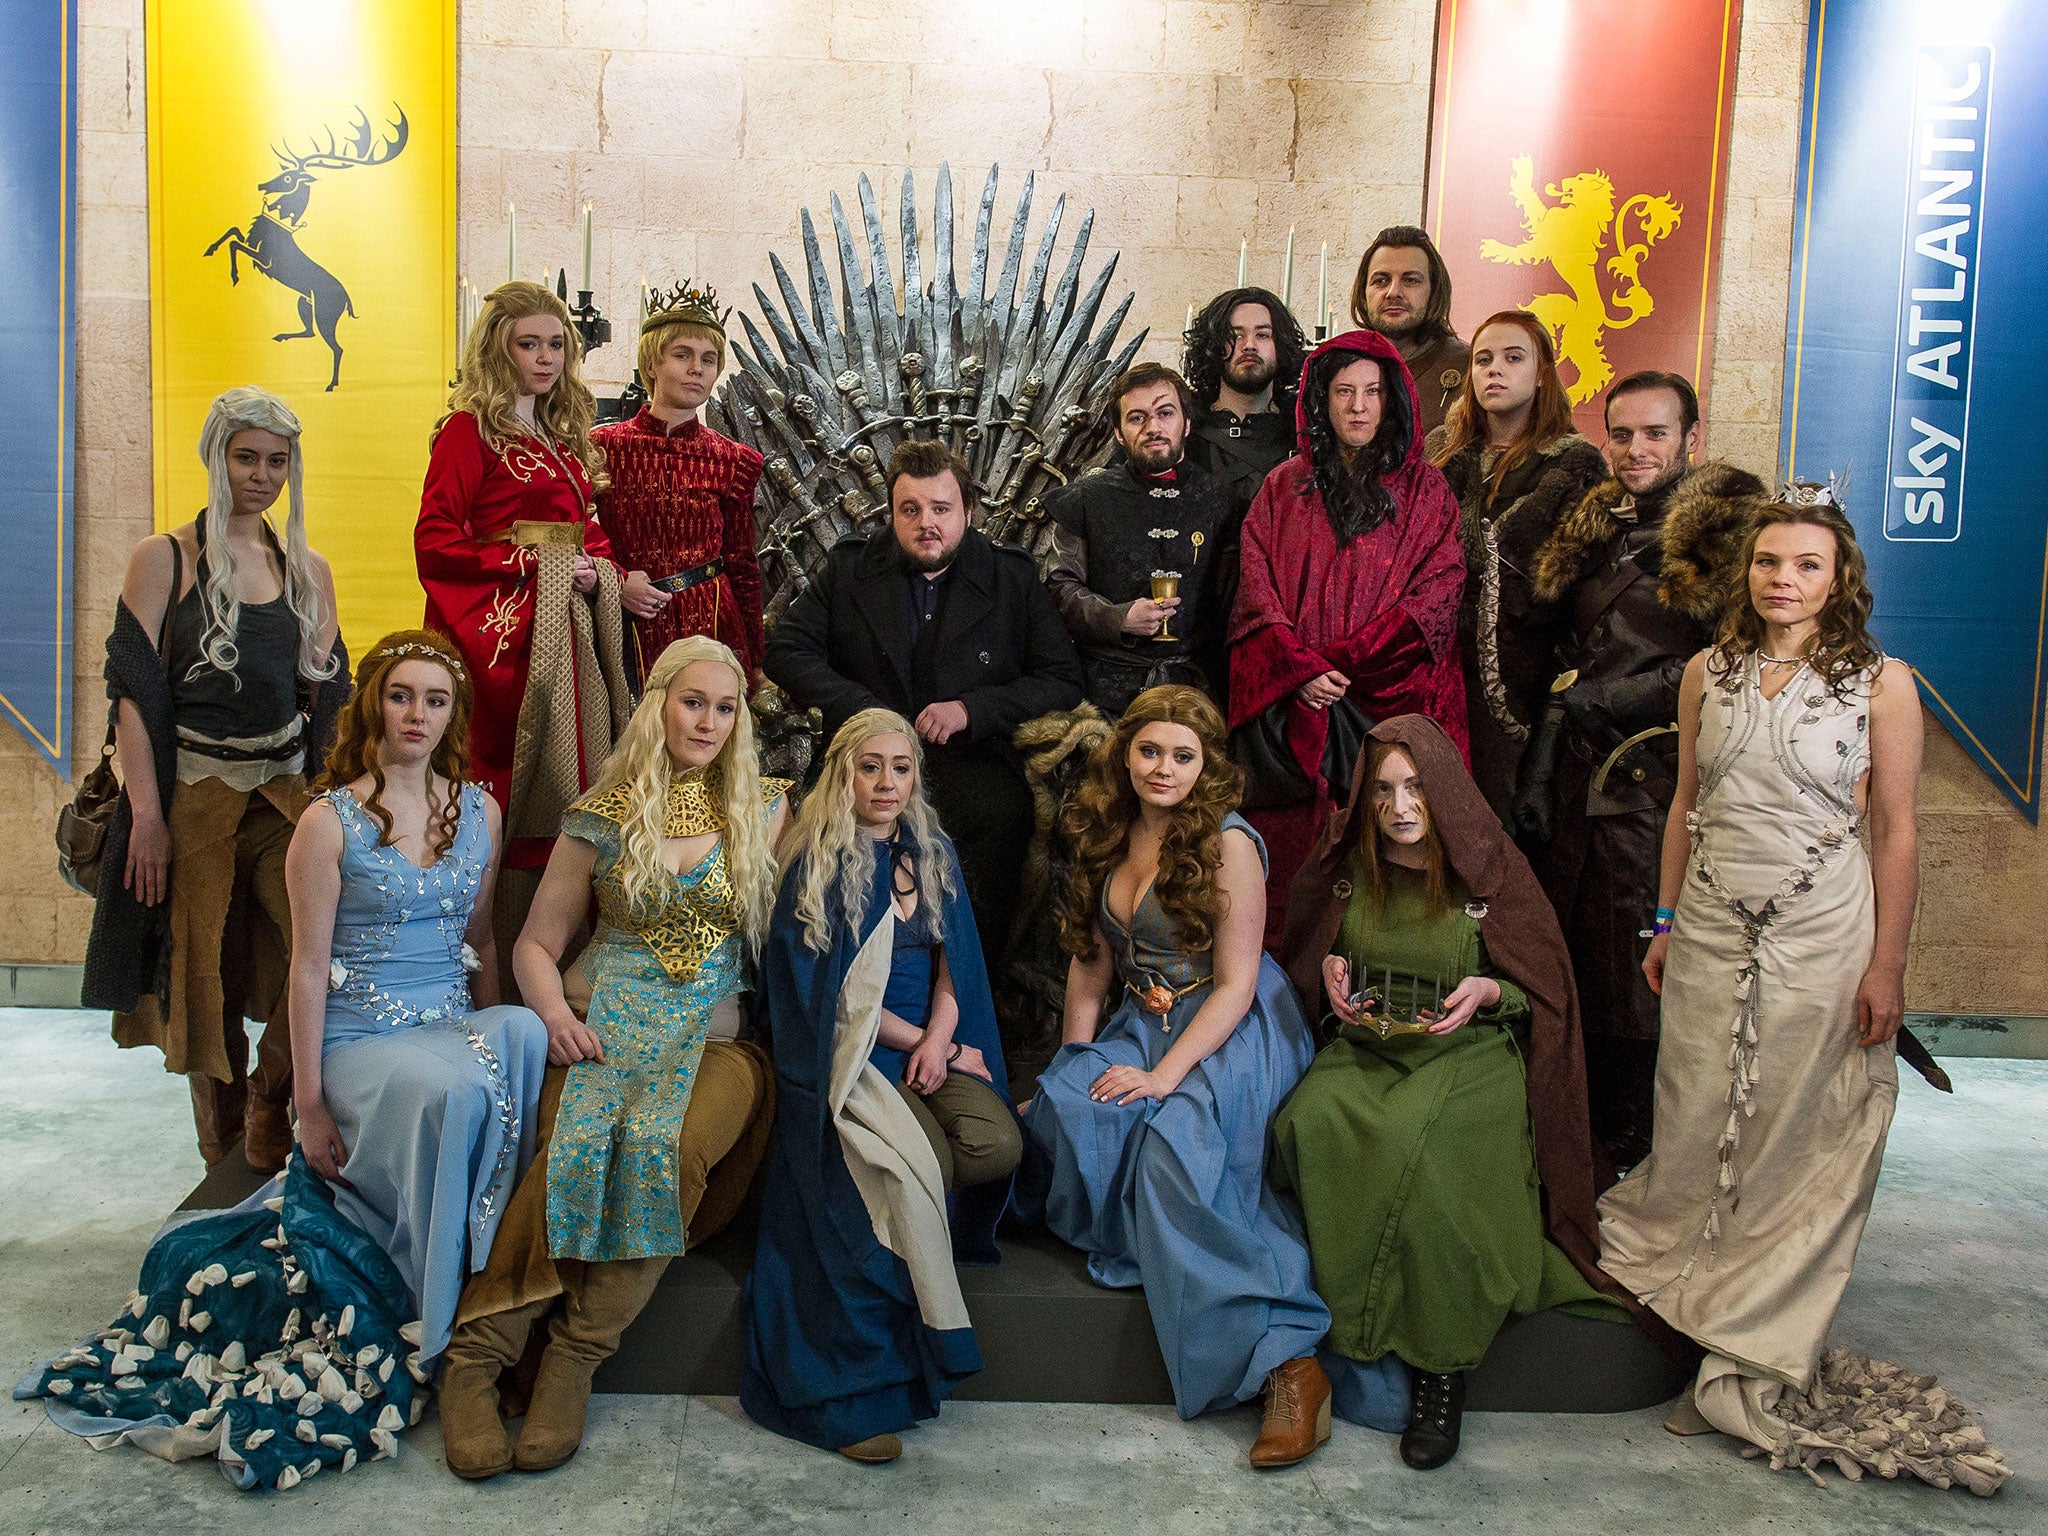 Game of Thrones: The Exhibition opens in London's O2 Arena